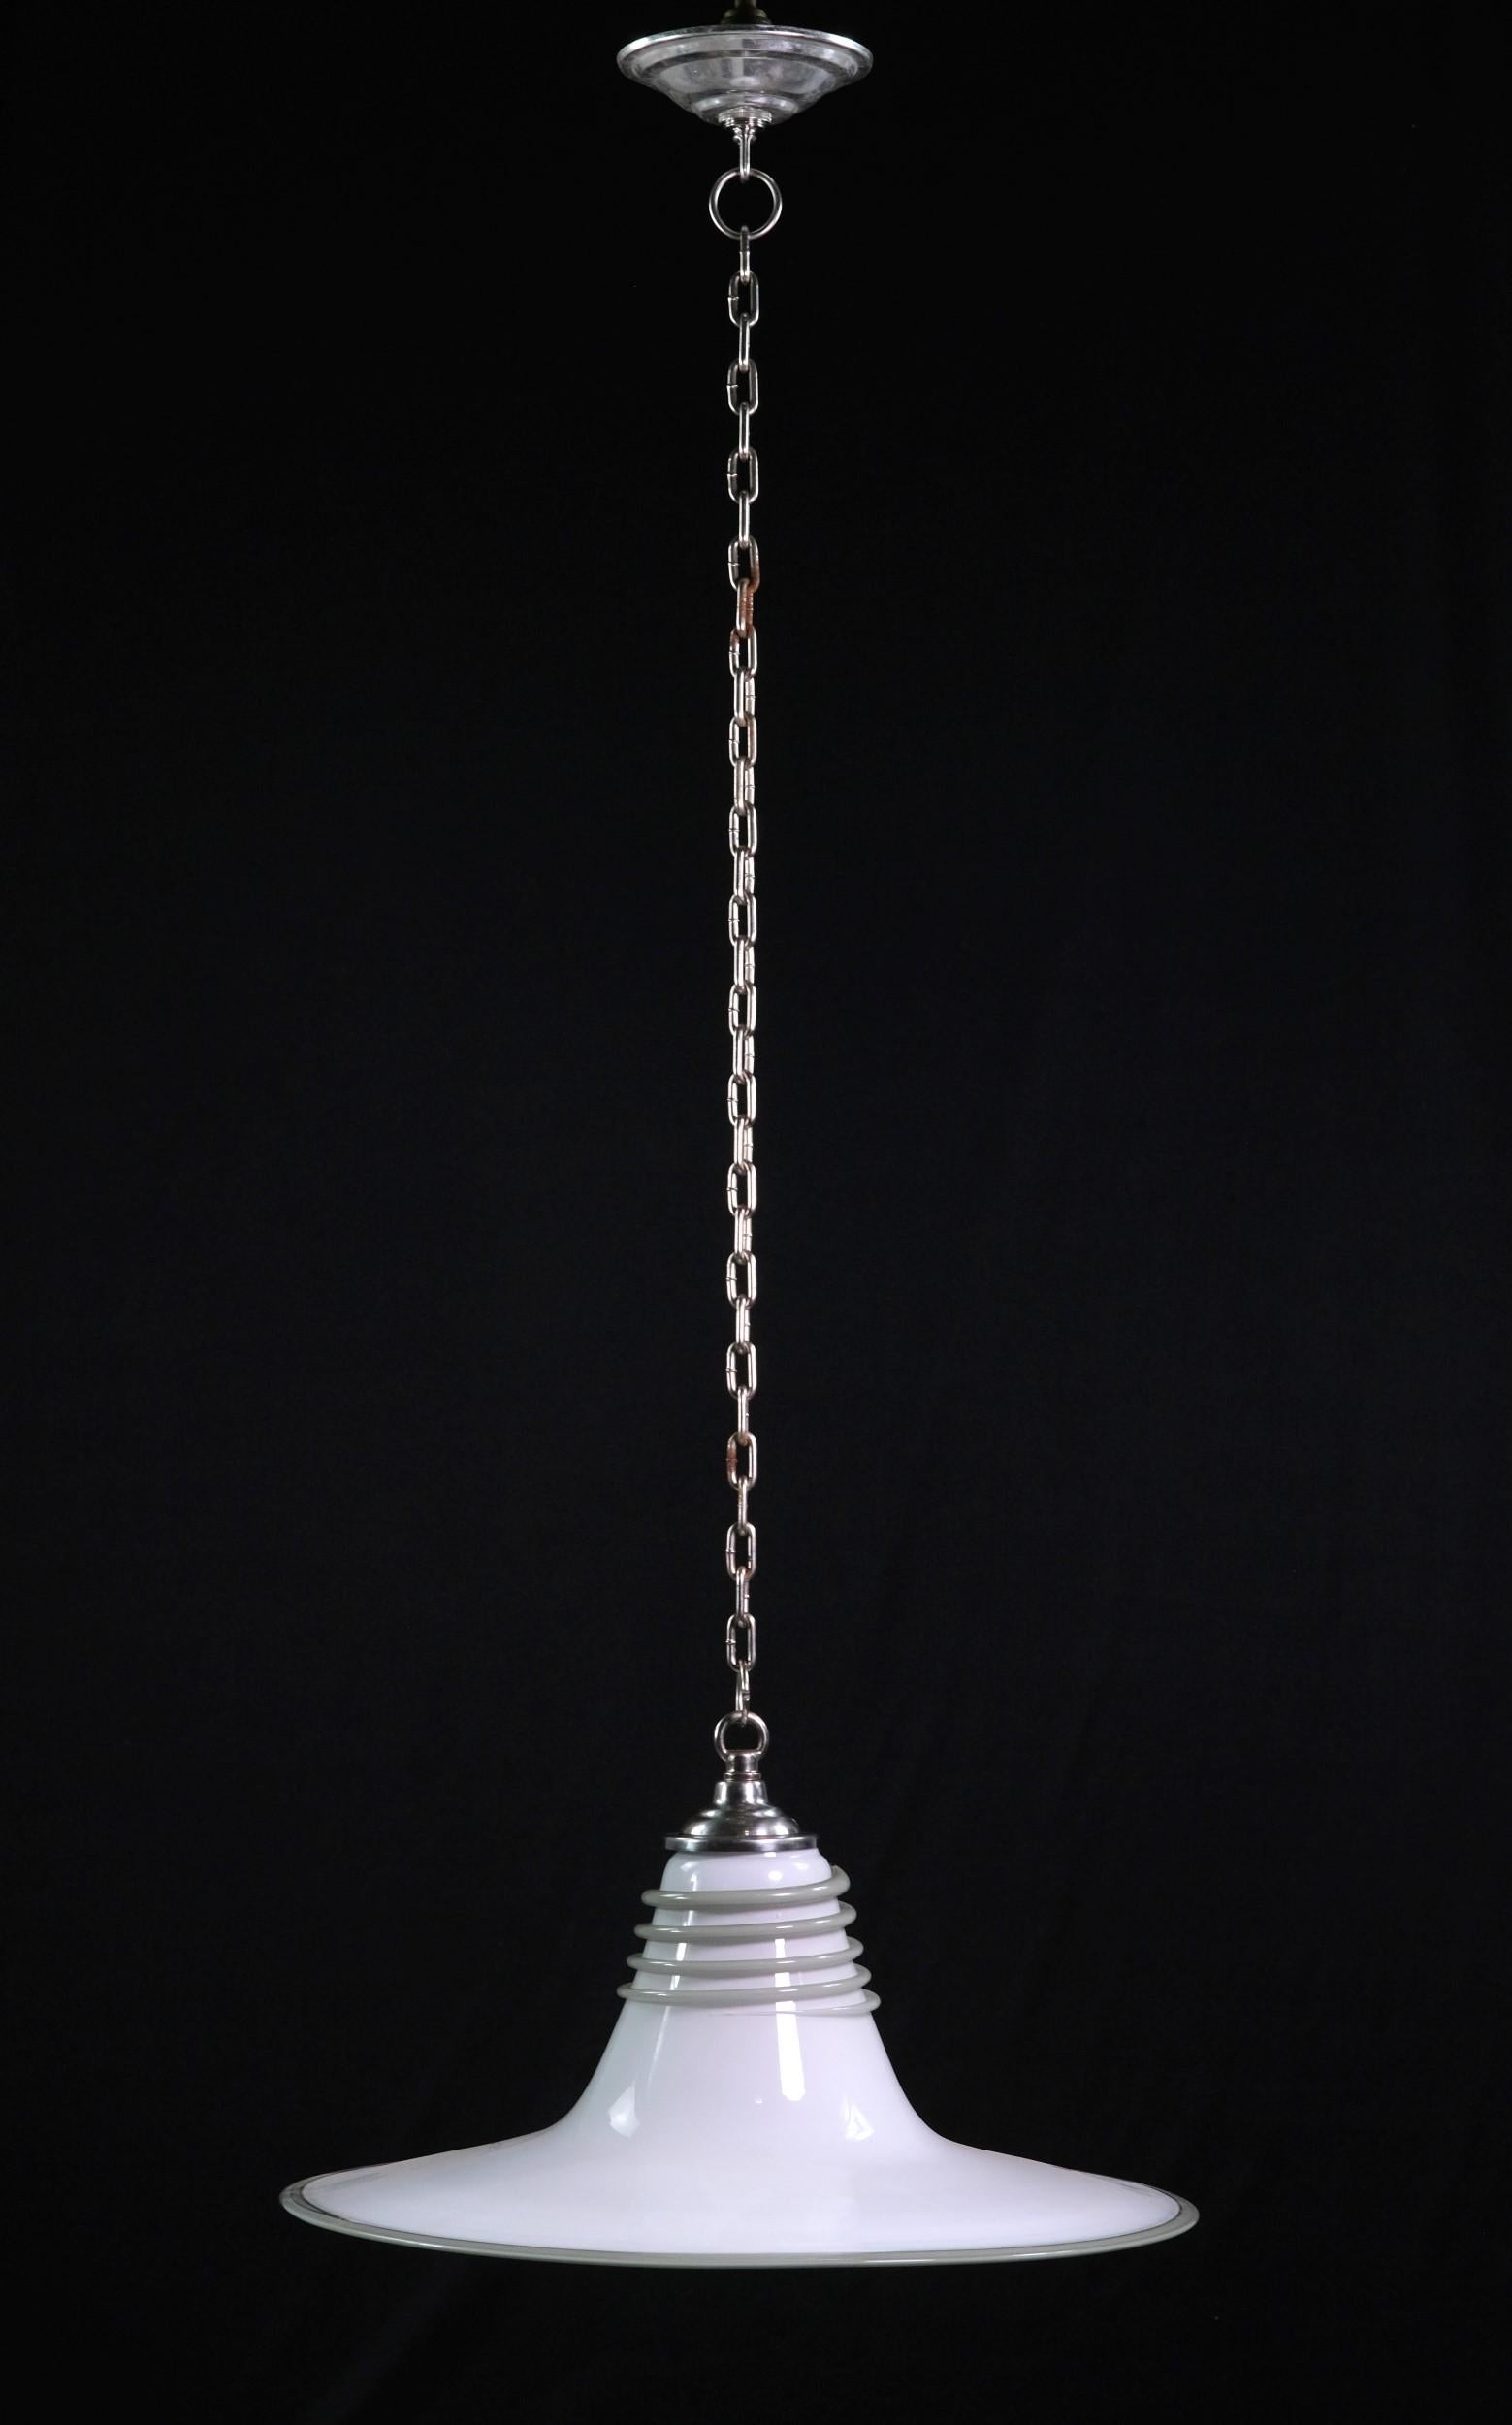 20th century, Vetri Murano hand blown glass pendant light hanging from a nickeled chain fitter and canopy. Adding to its unique design, there is a gray glass coil wrapped around the top of the white glass shade. Due to the coil glass being hand